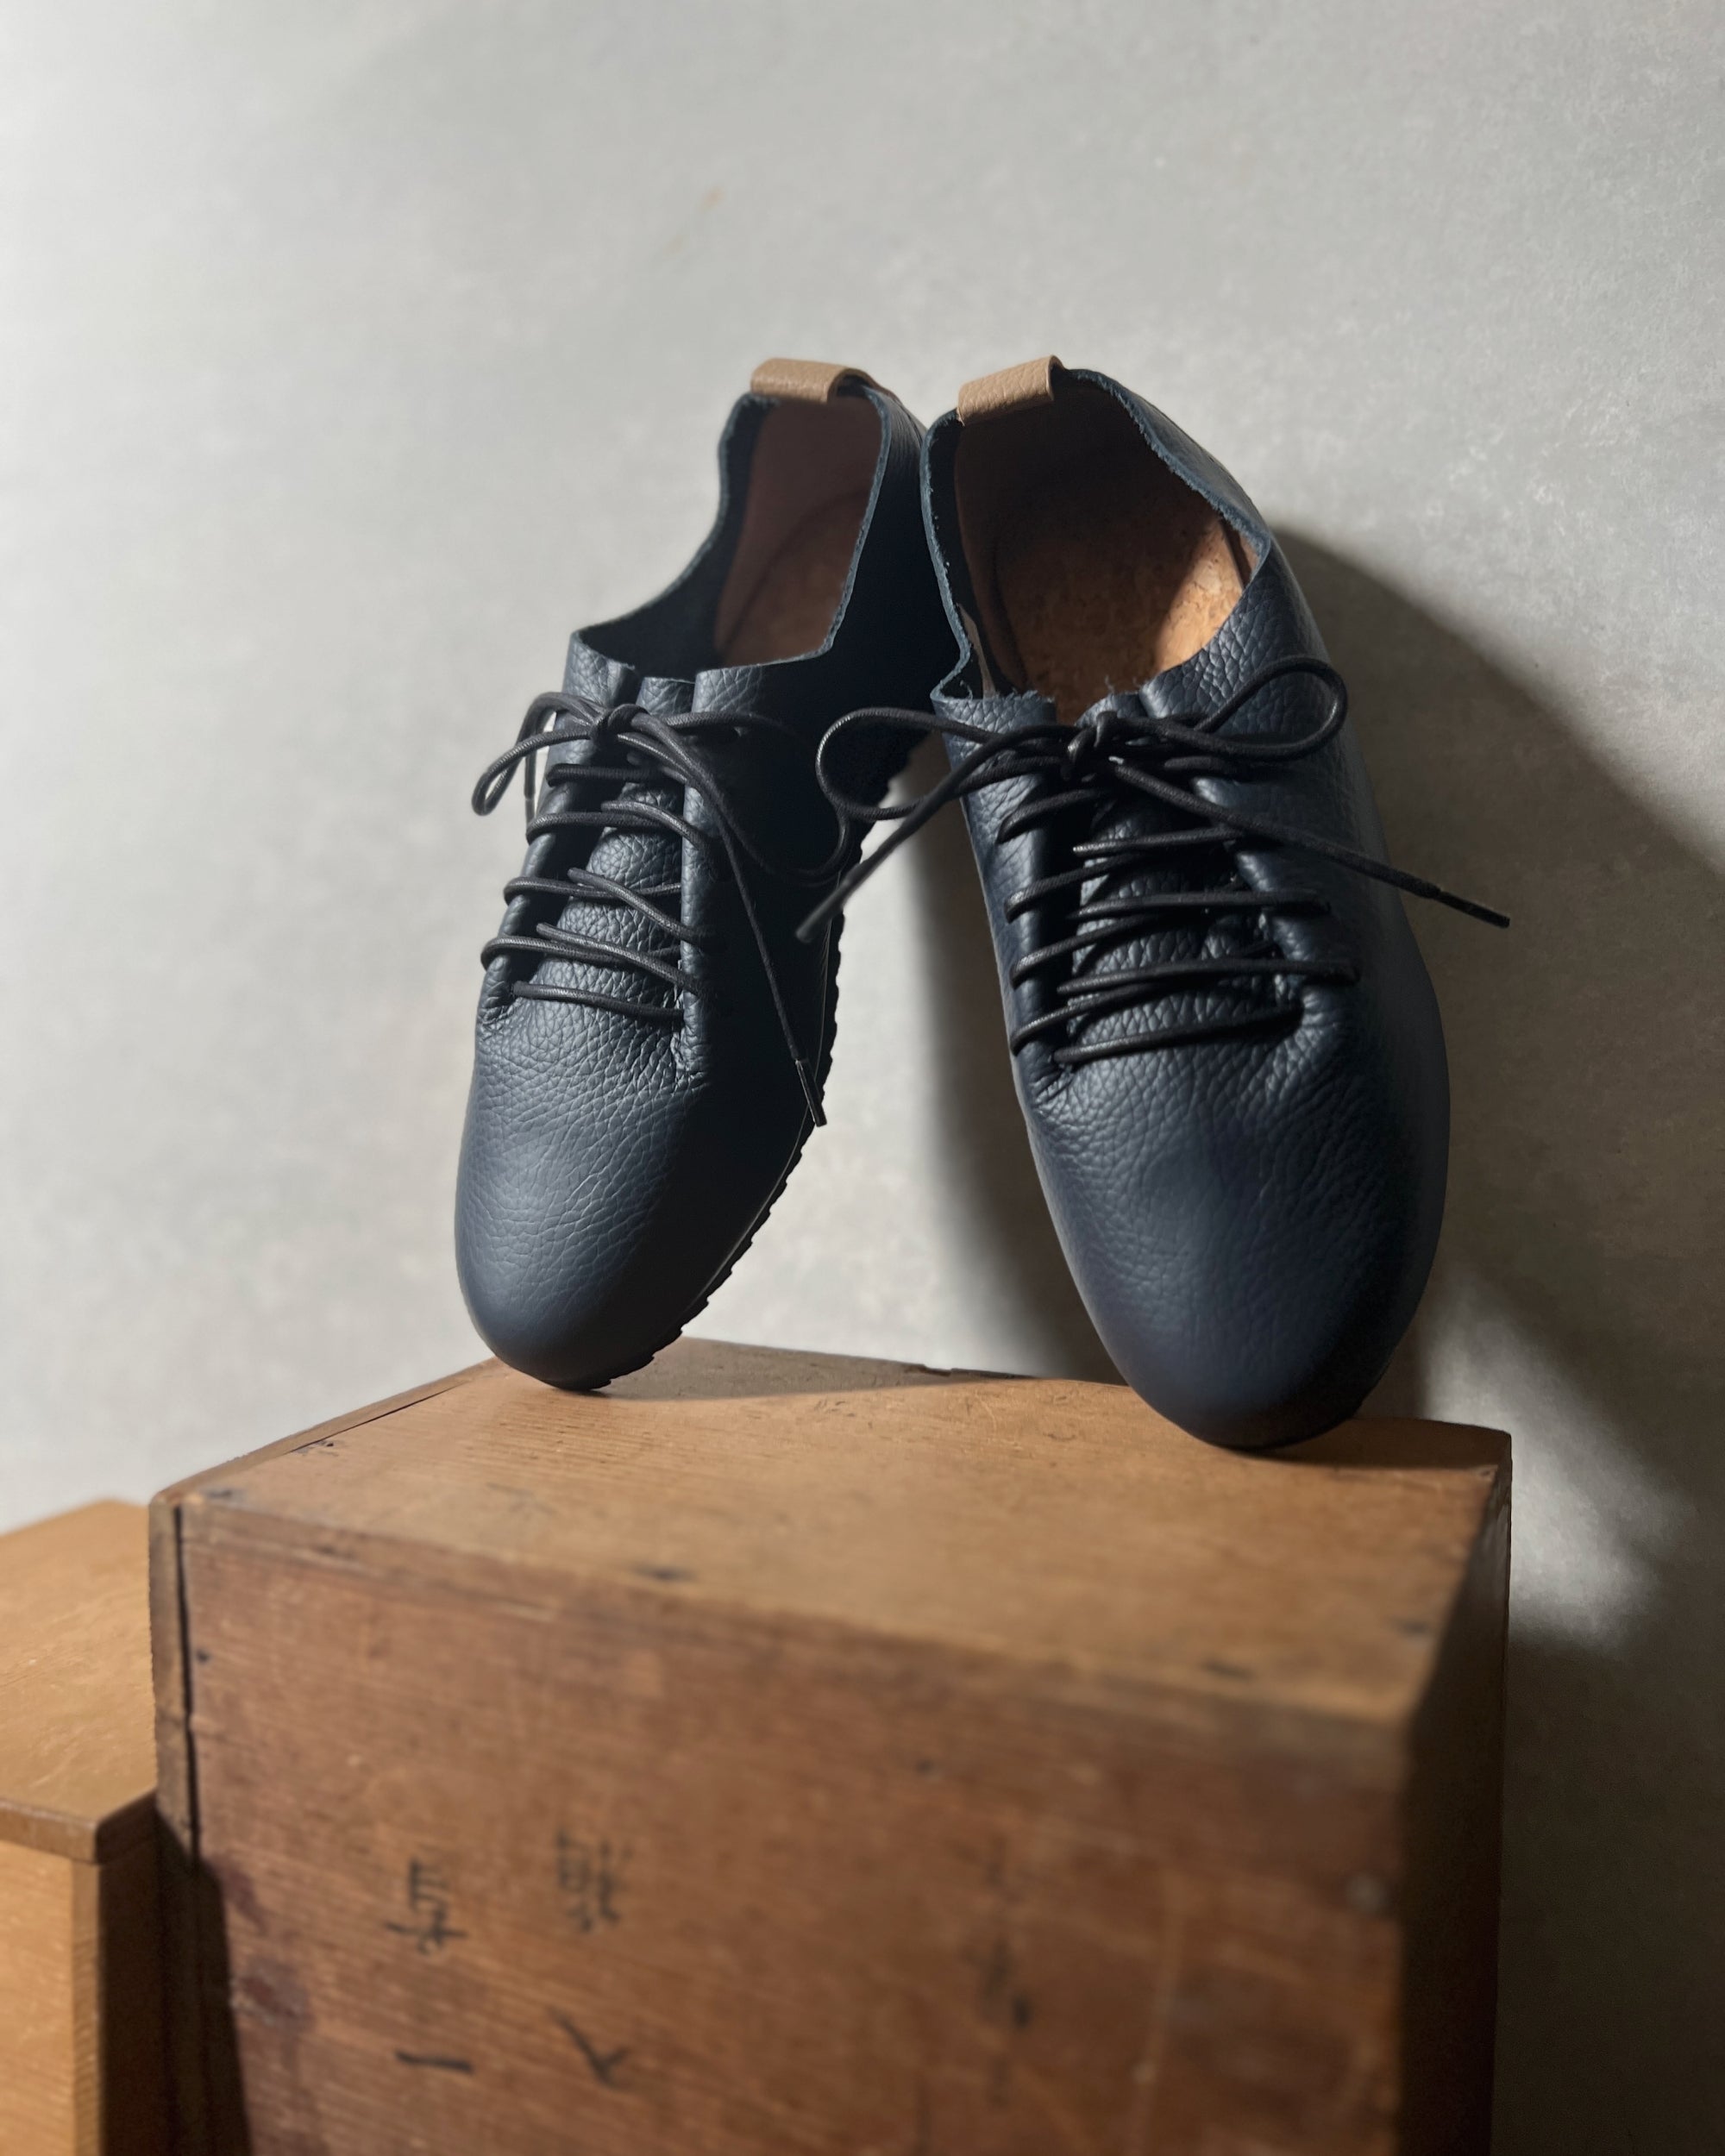 Leather sneakers, designed in japan and made in Spain